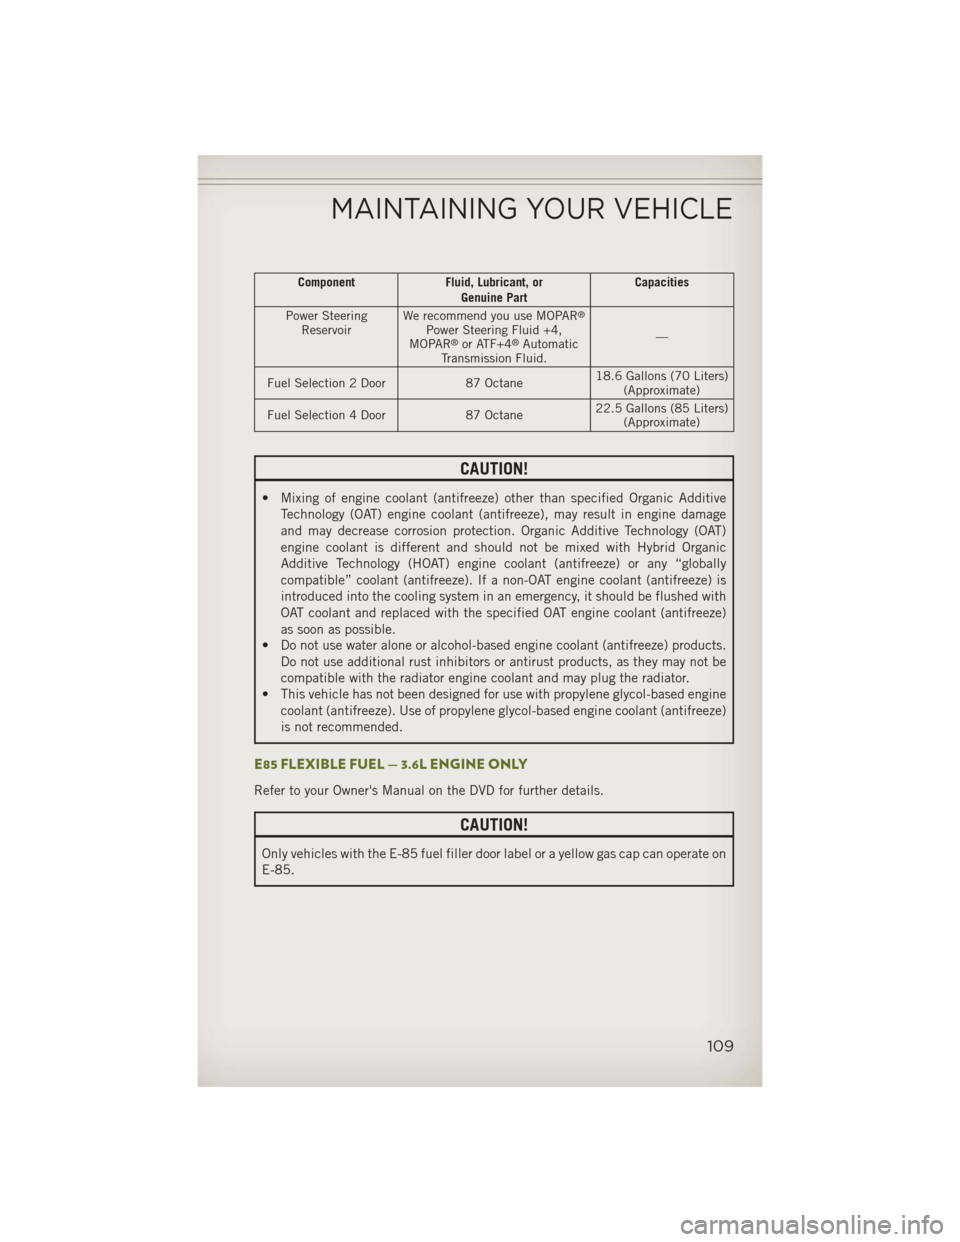 JEEP WRANGLER 2013 JK / 3.G User Guide ComponentFluid, Lubricant, or
Genuine Part Capacities
Power Steering Reservoir We recommend you use MOPAR
®
Power Steering Fluid +4,
MOPAR®or ATF+4®Automatic
Transmission Fluid. —
Fuel Selection 